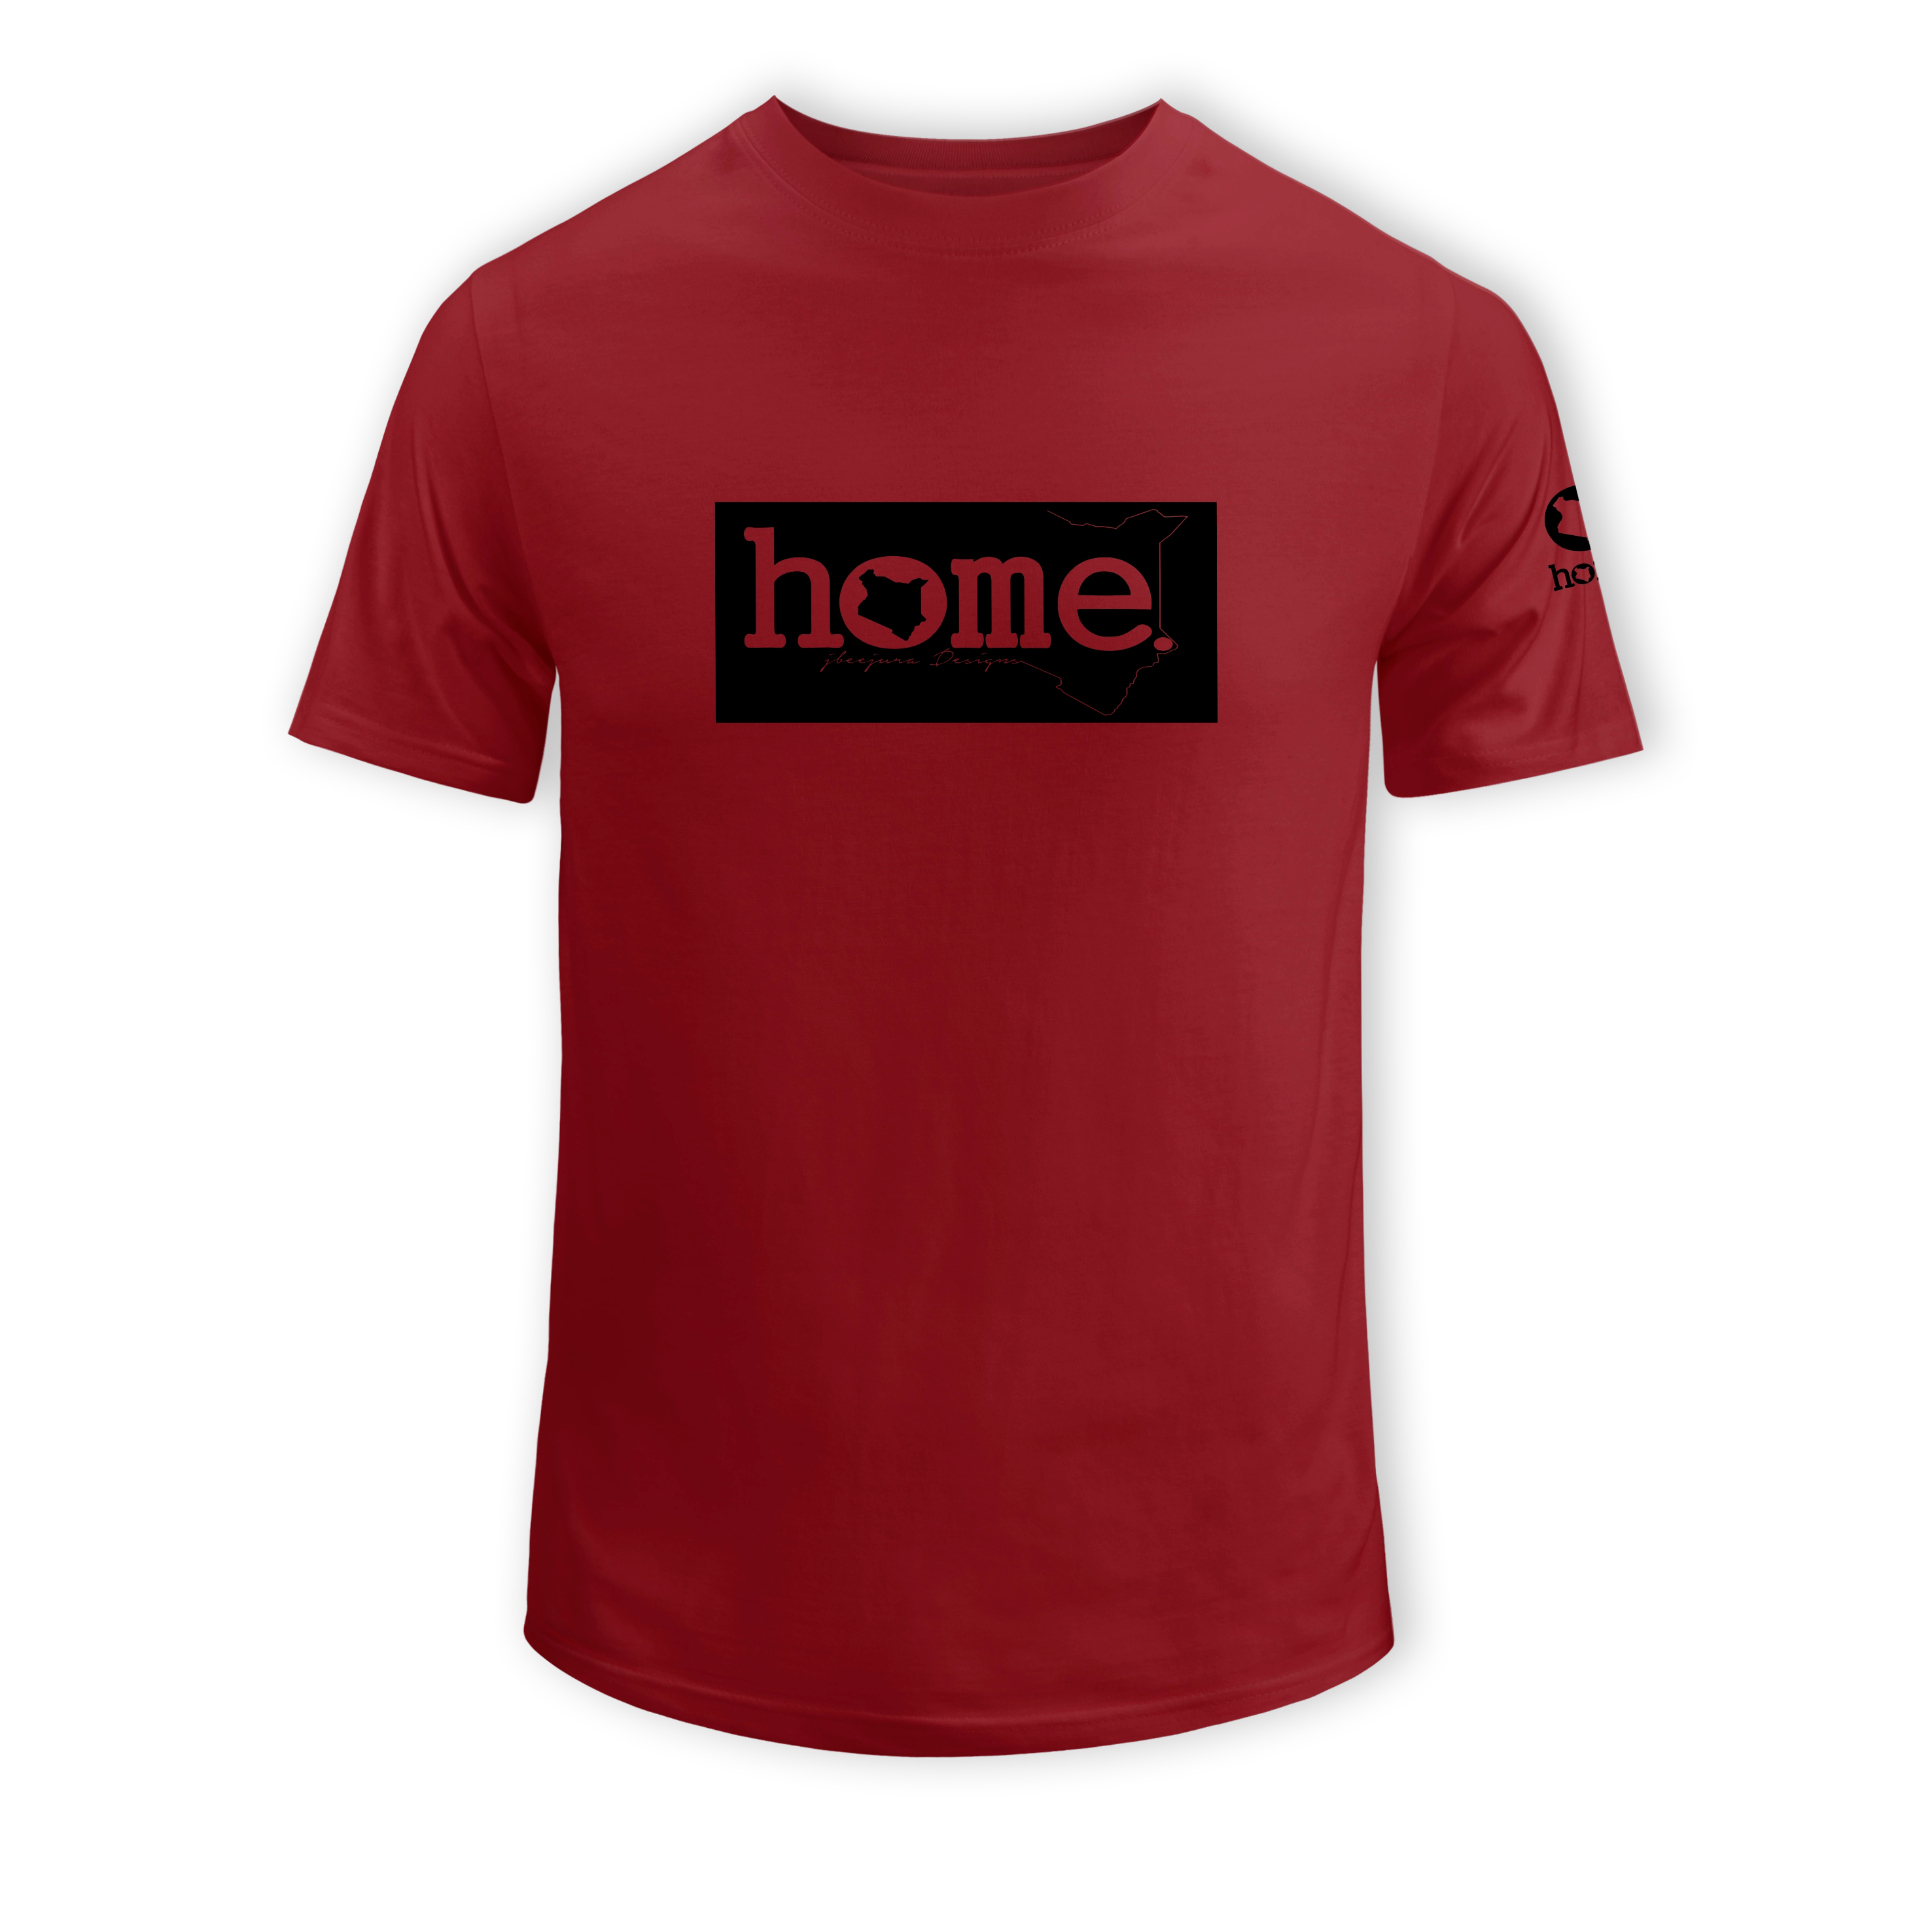 home_254 SHORT-SLEEVED MAROON RED T-SHIRT WITH A BLACK CLASSIC PRINT – COTTON PLUS FABRIC